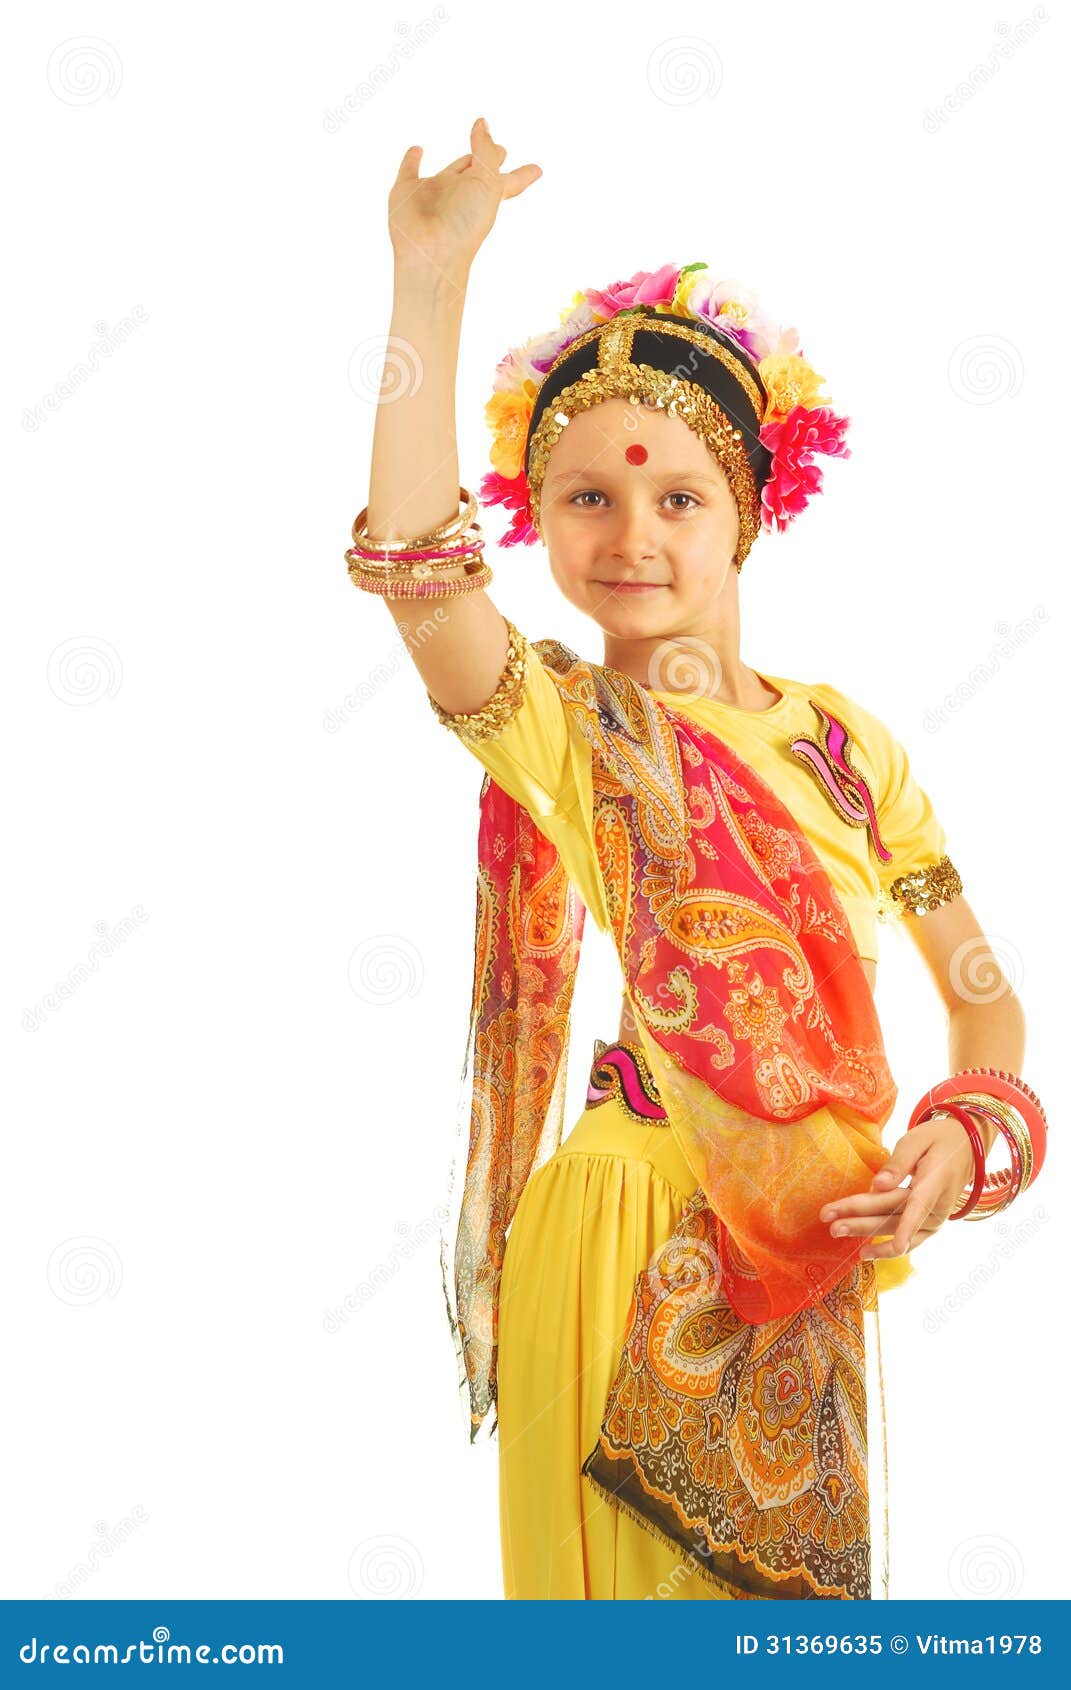 915 Indian Girl Performing Dance Photos Free Royalty Free Stock Photos From Dreamstime